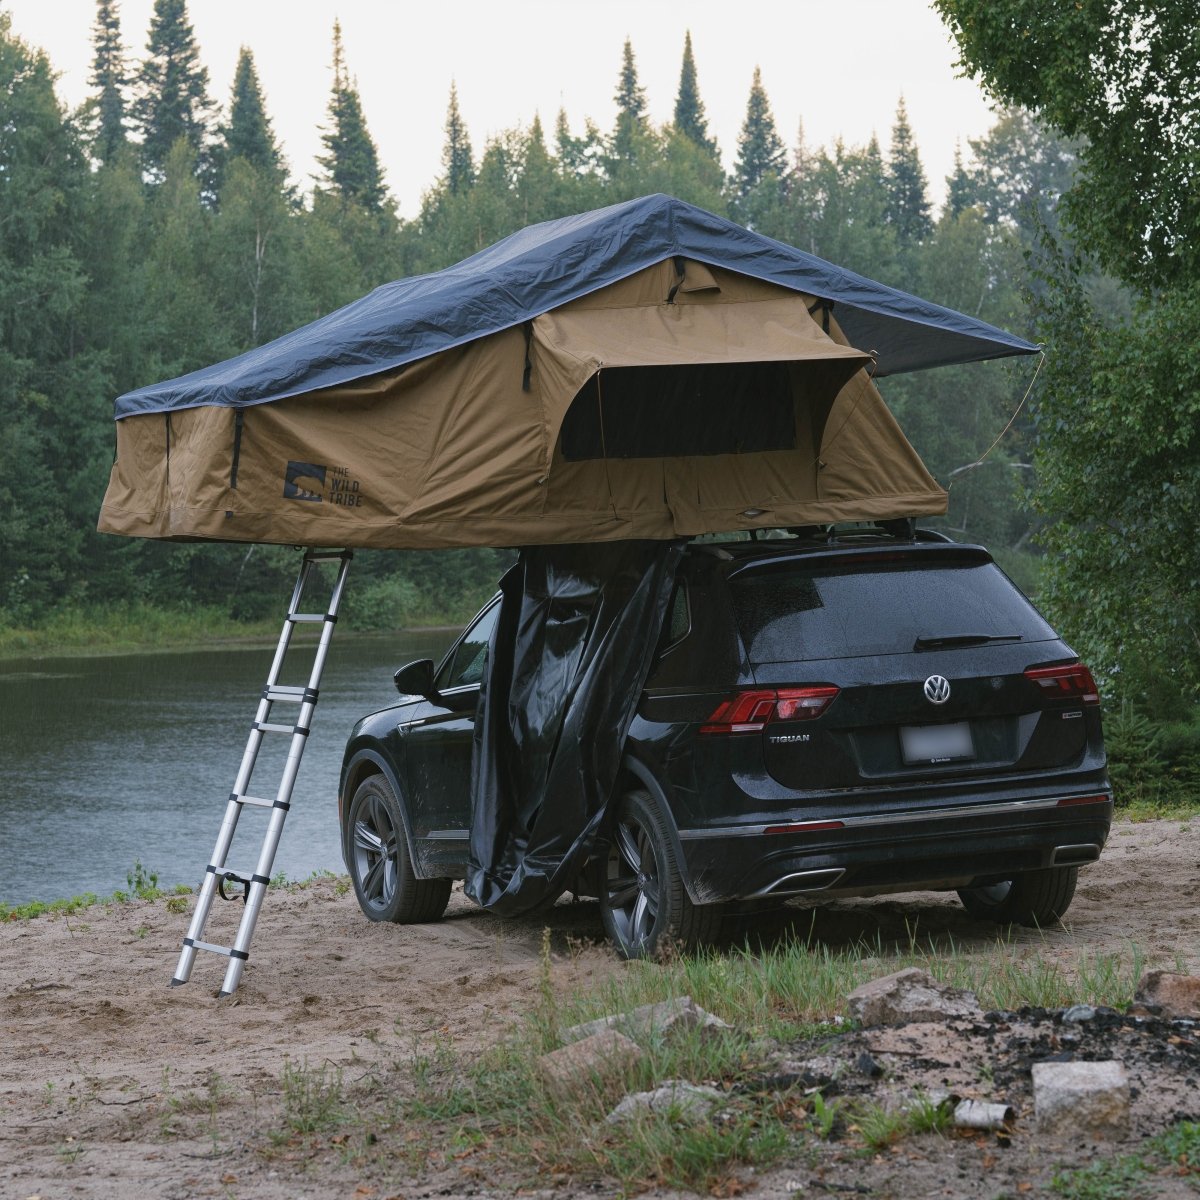 Chic Choc 2 XE Rooftop Tent – Universal Fit with Rain-Covered Entrance & 270° Panoramic View - The Wild Tribe